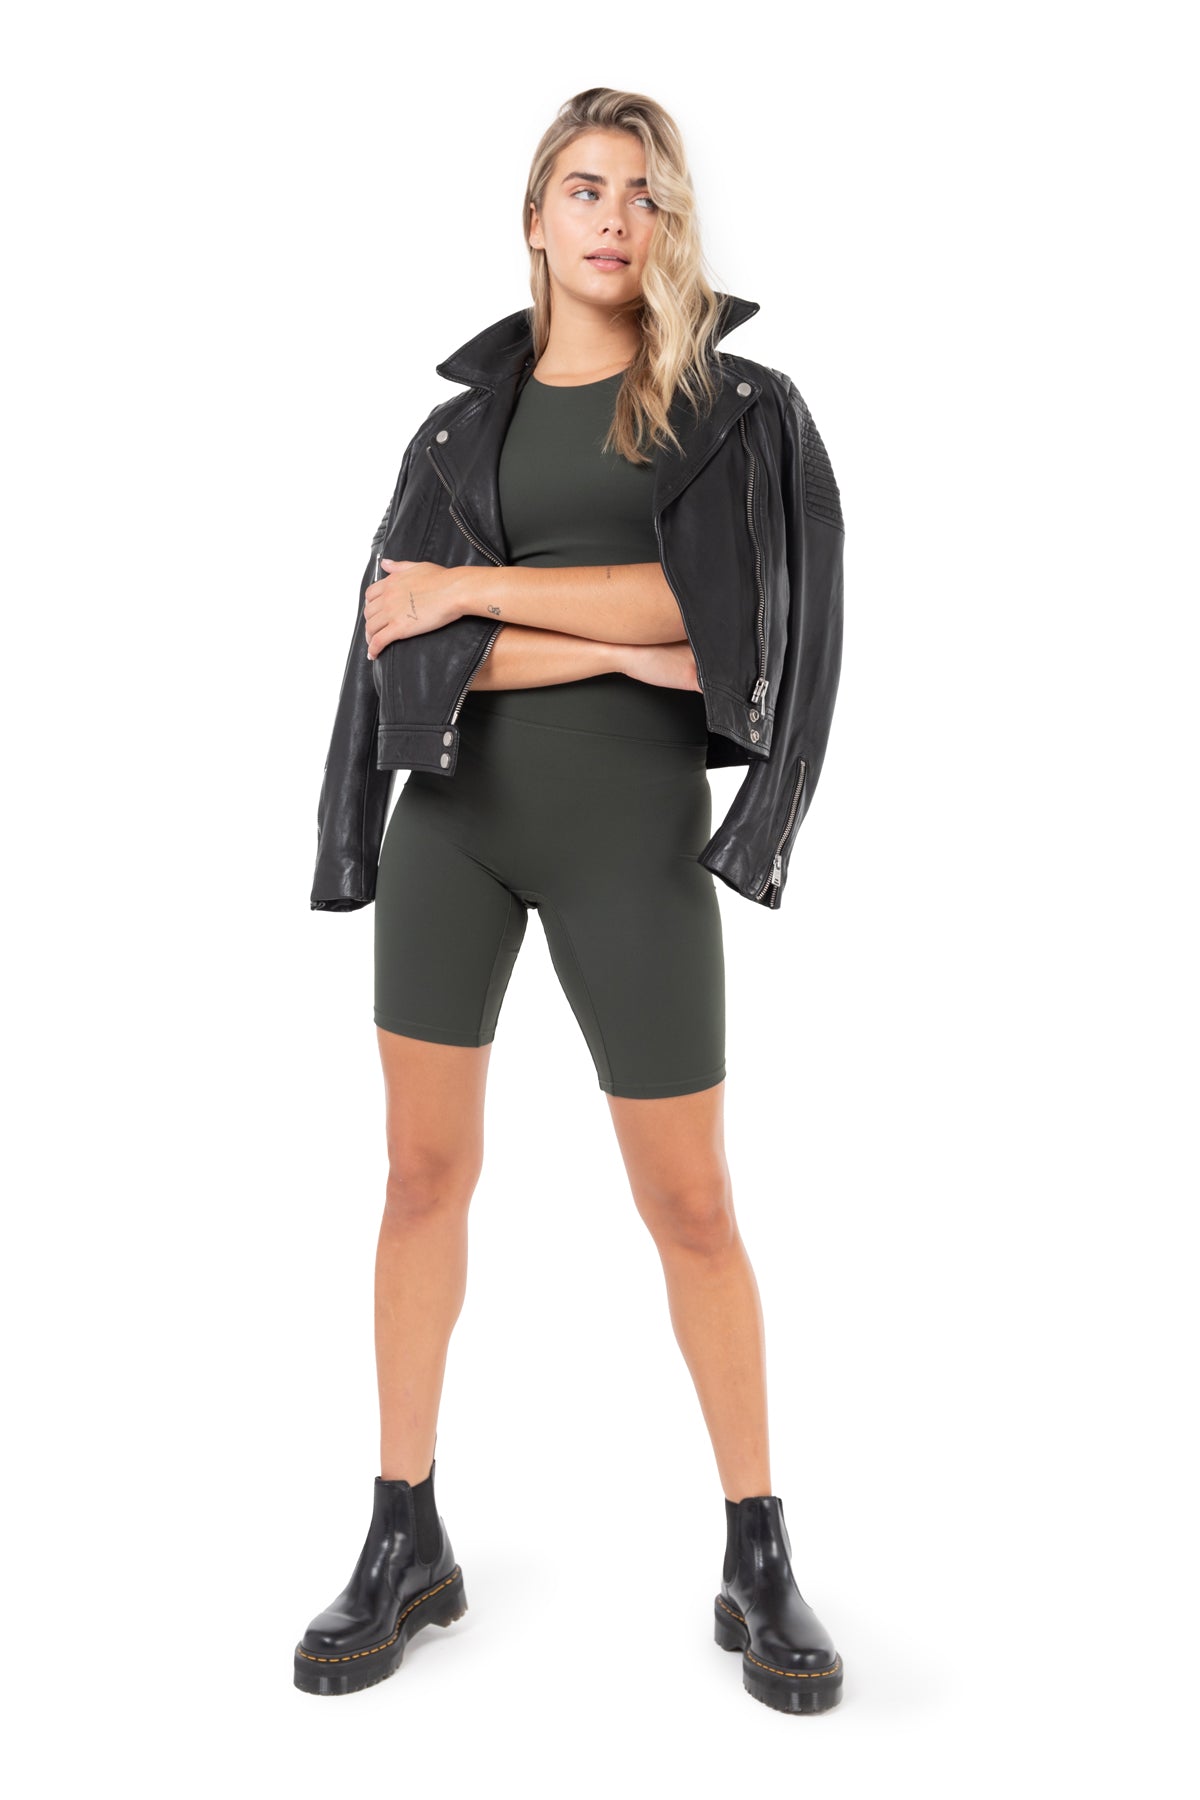 Kyodan Black Gray Workout Athletic Leggings - $12 (84% Off Retail) - From  Alix